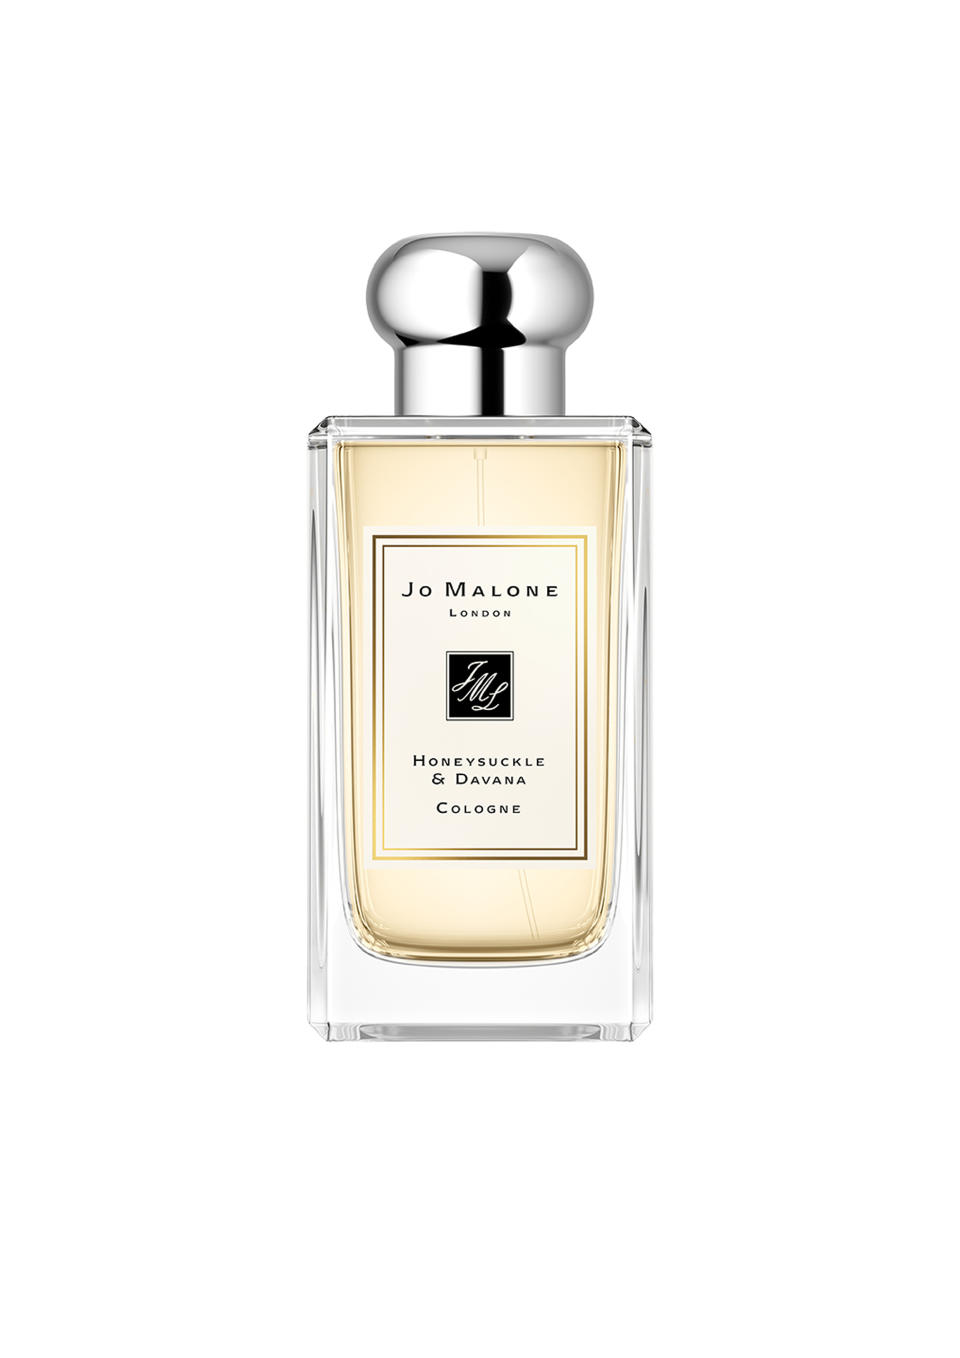 <p>The latest scent collection from Jo Malone doesn’t disappoint. Packed with floral top notes and woody undertones, it’s perfect for wearing along or layered with the brand’s Grapefruit or Oud & Bergamot scents. </p>